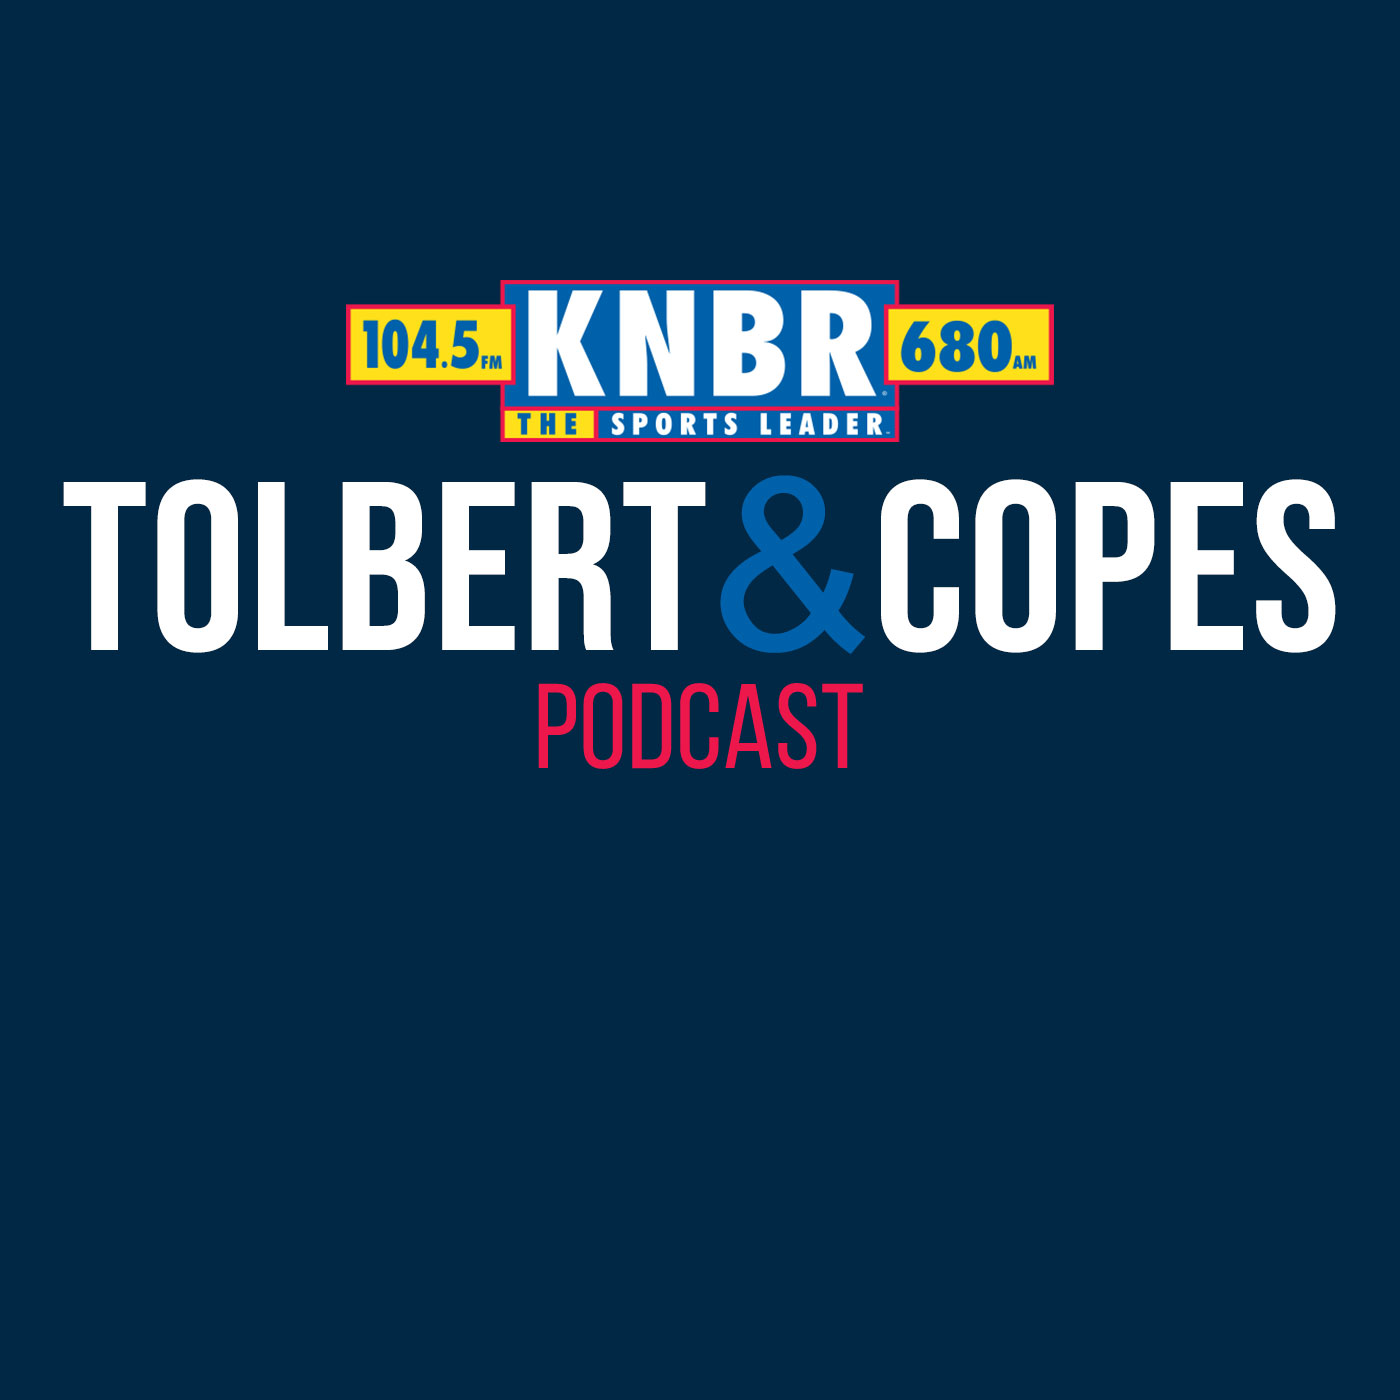 Jon Morosi joins Tolbert & Copes to react to Aaron Judge re-signing with the Yankees but believes the Giants are in on Carlos Correa